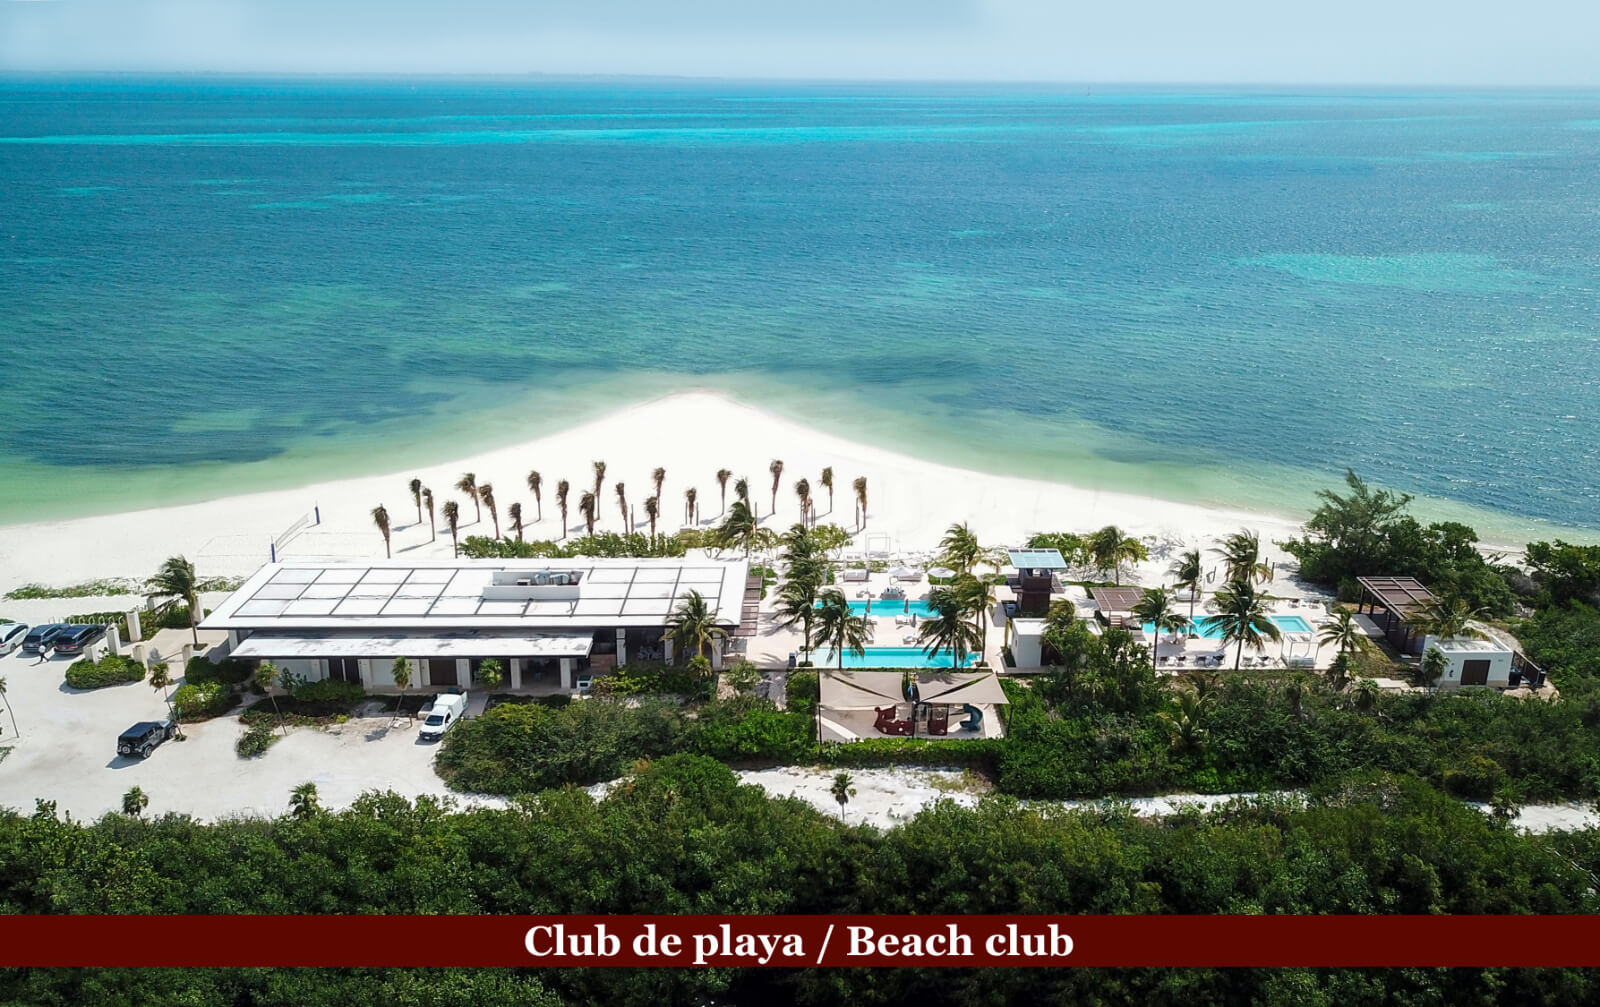 Apartment with beach club facing the sea, swimming pool, paddle tennis court and playroom in , Cancún.